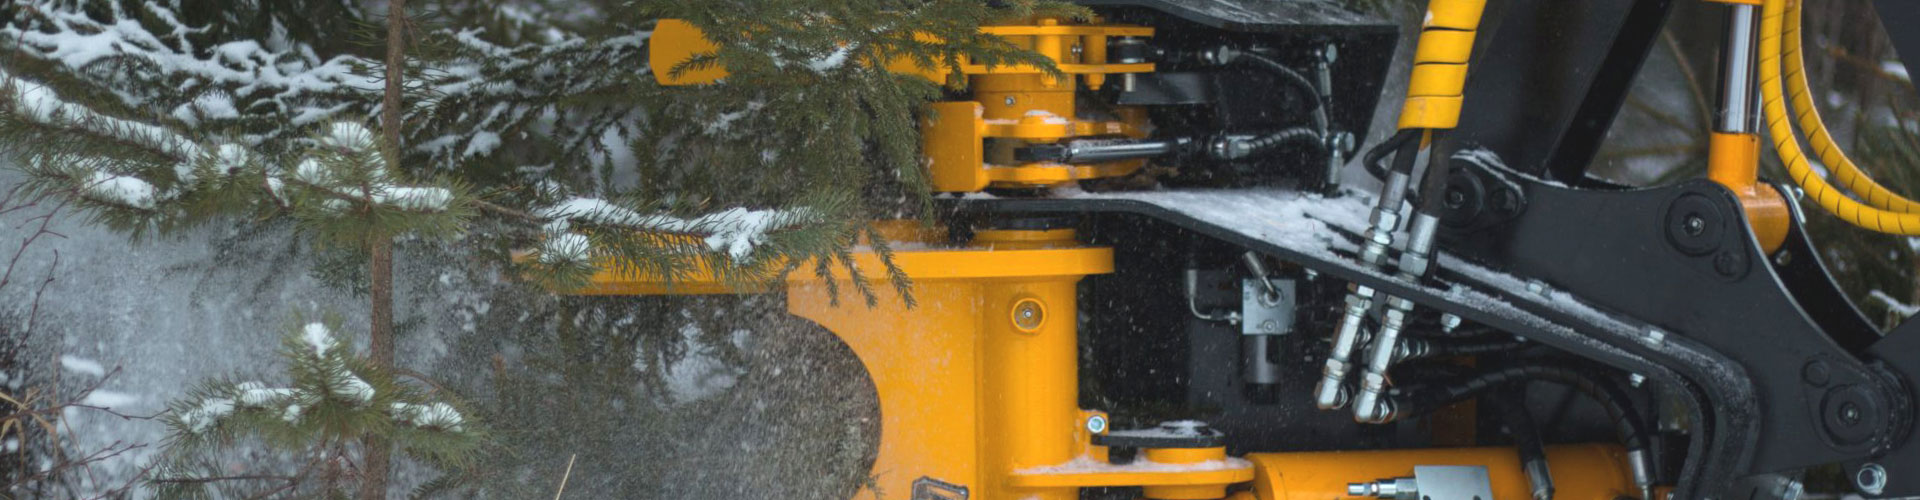 Wood harvesting machines, Forest Equipment, Forest machines